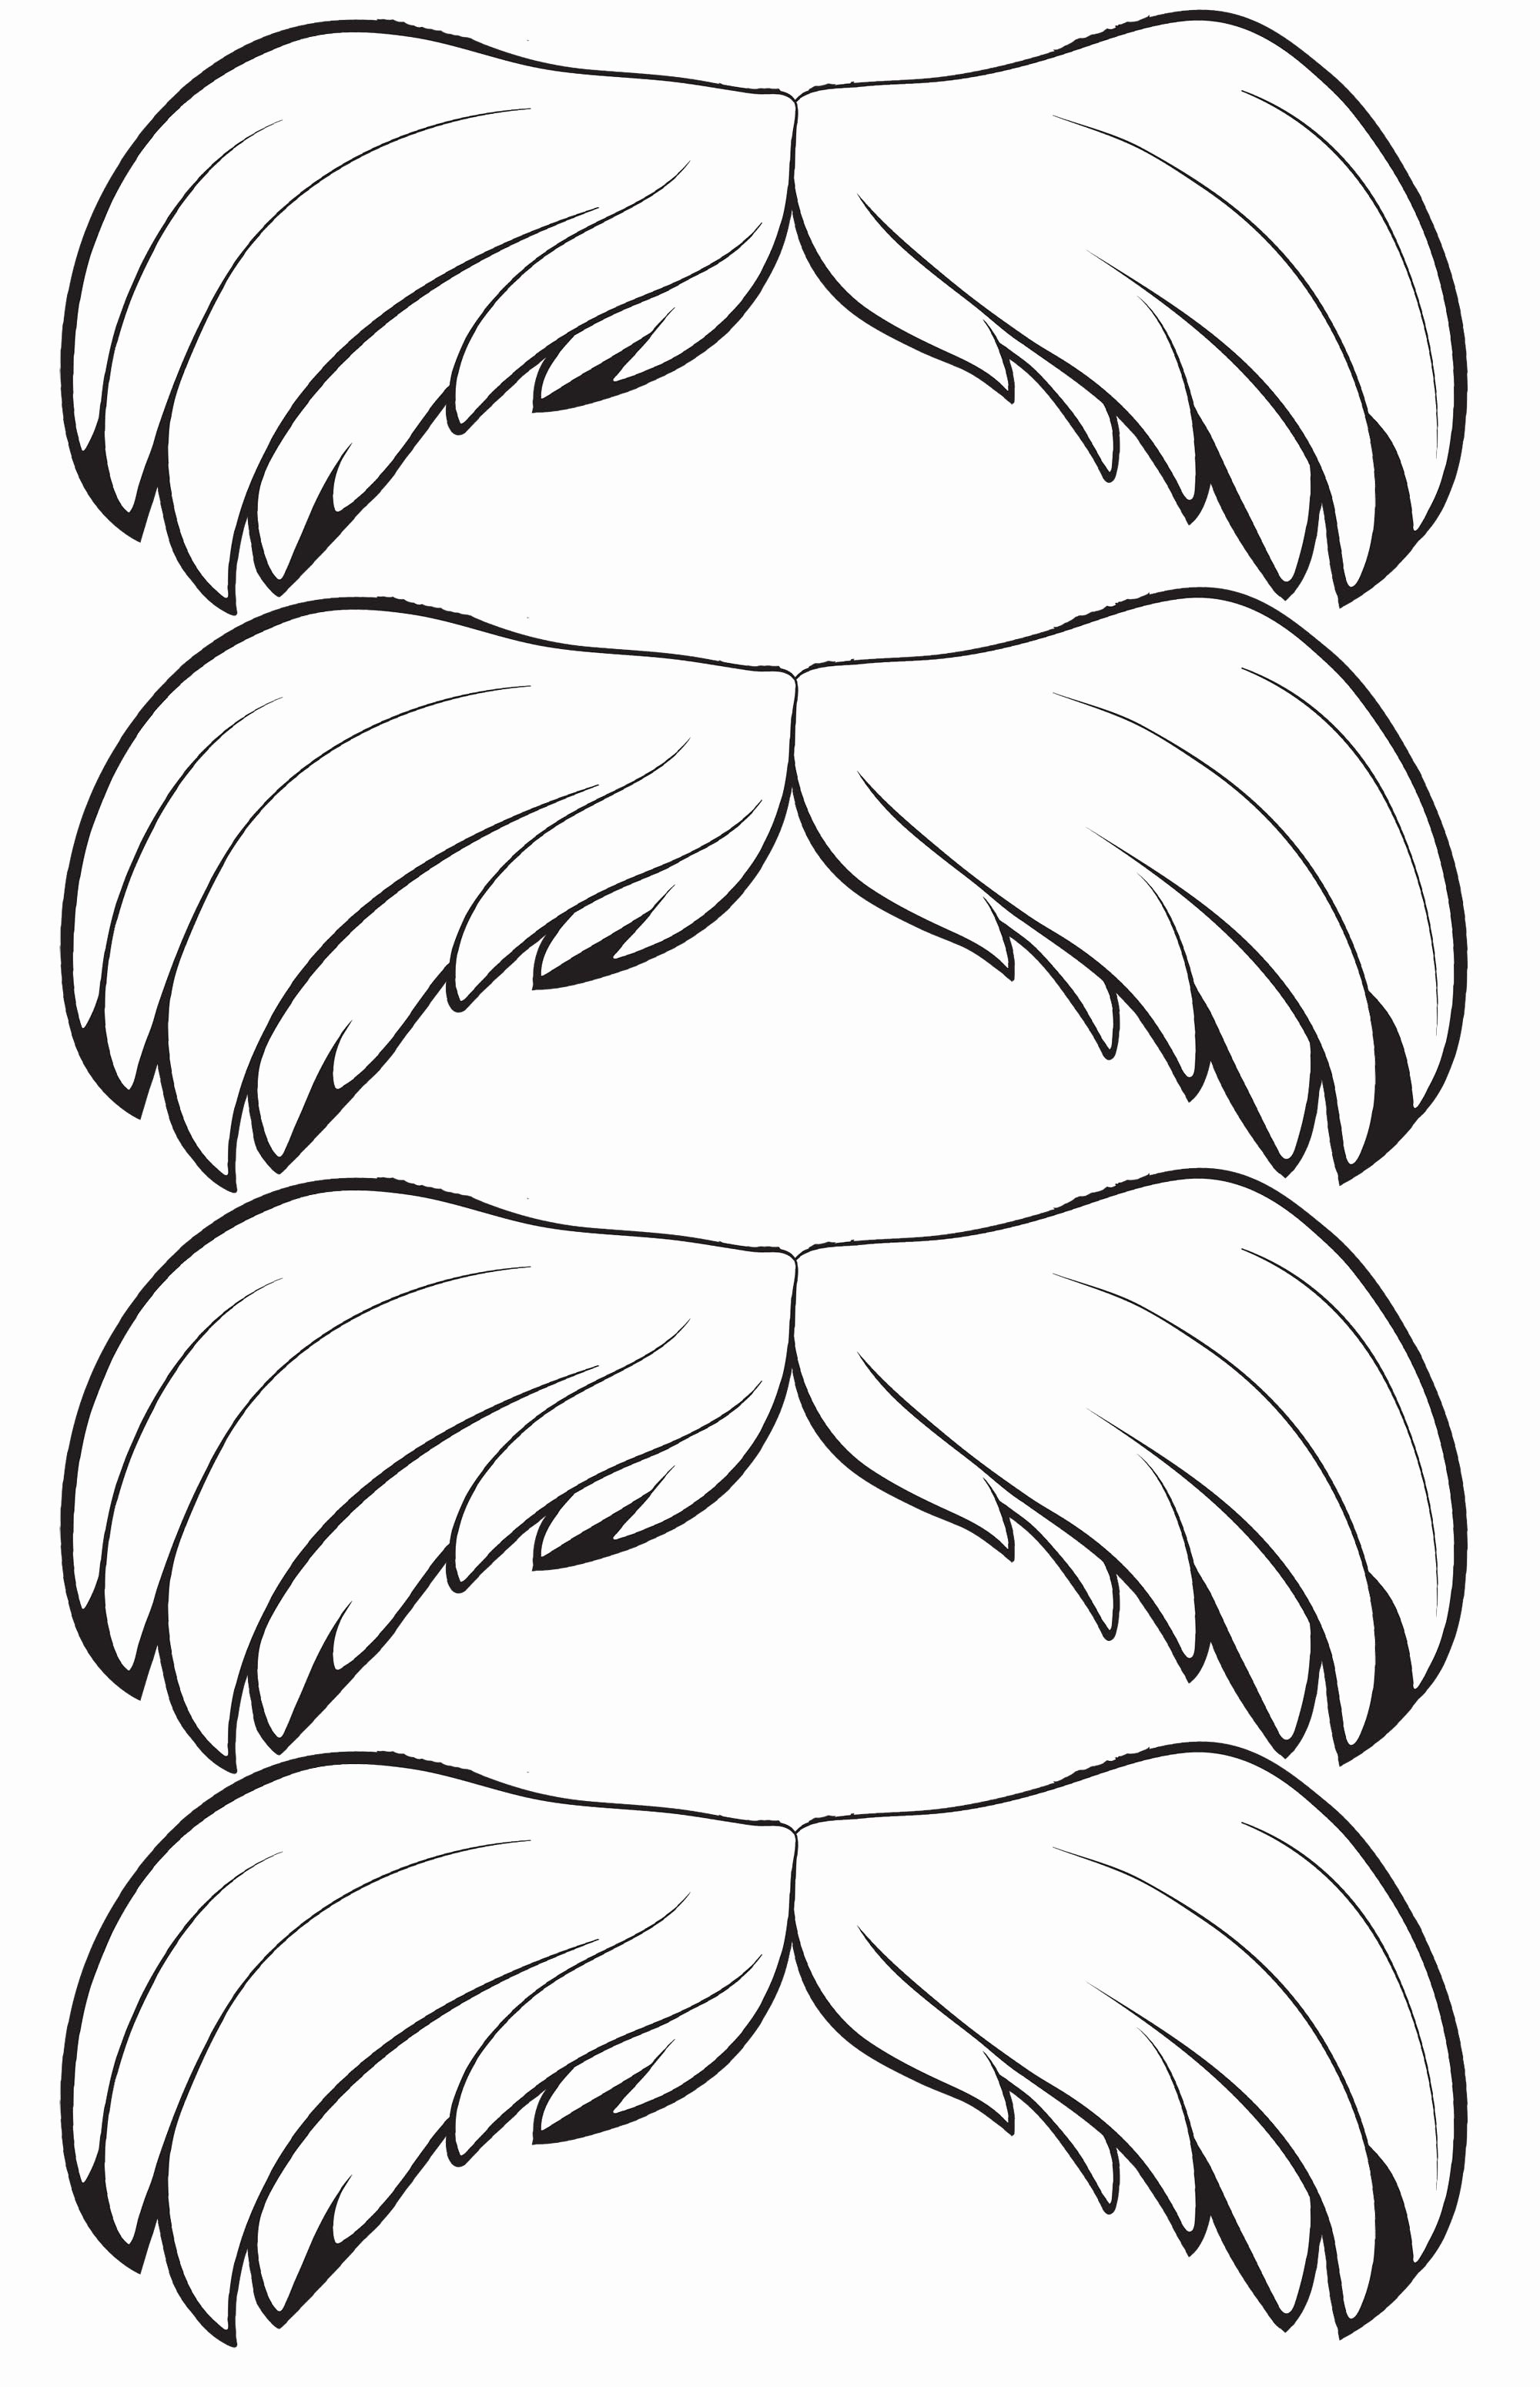 Lorax Eyebrow Template Unique the Lorax Printables